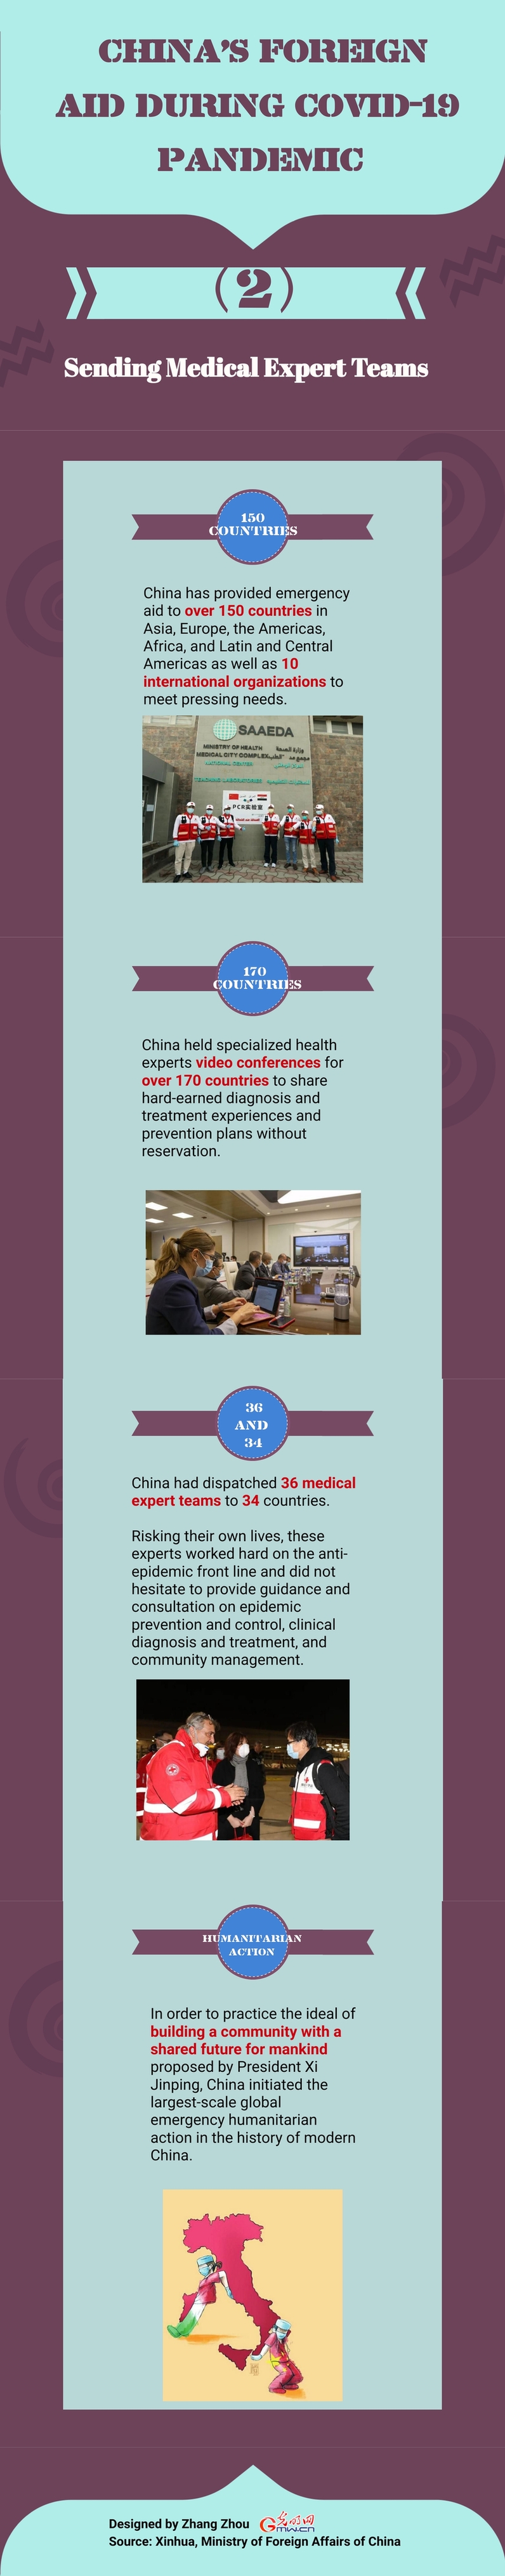 Infographic: China’s Foreign Aid during COVID-19 Pandemic (2)——Sending Medical Expert Teams